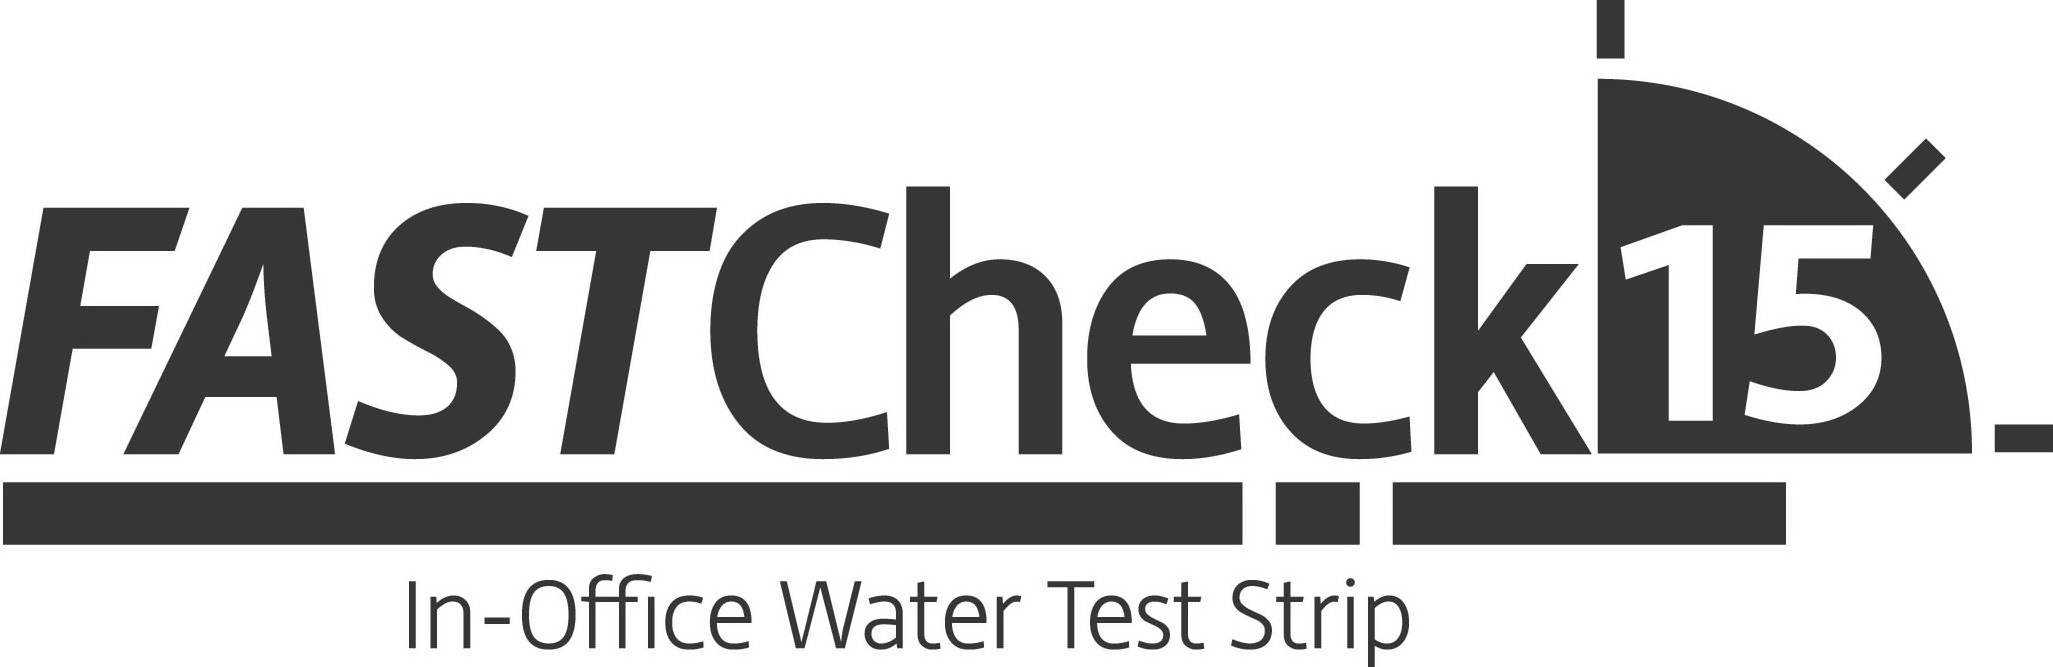  FASTCHECK15 IN-OFFICE WATER TEST STRIP